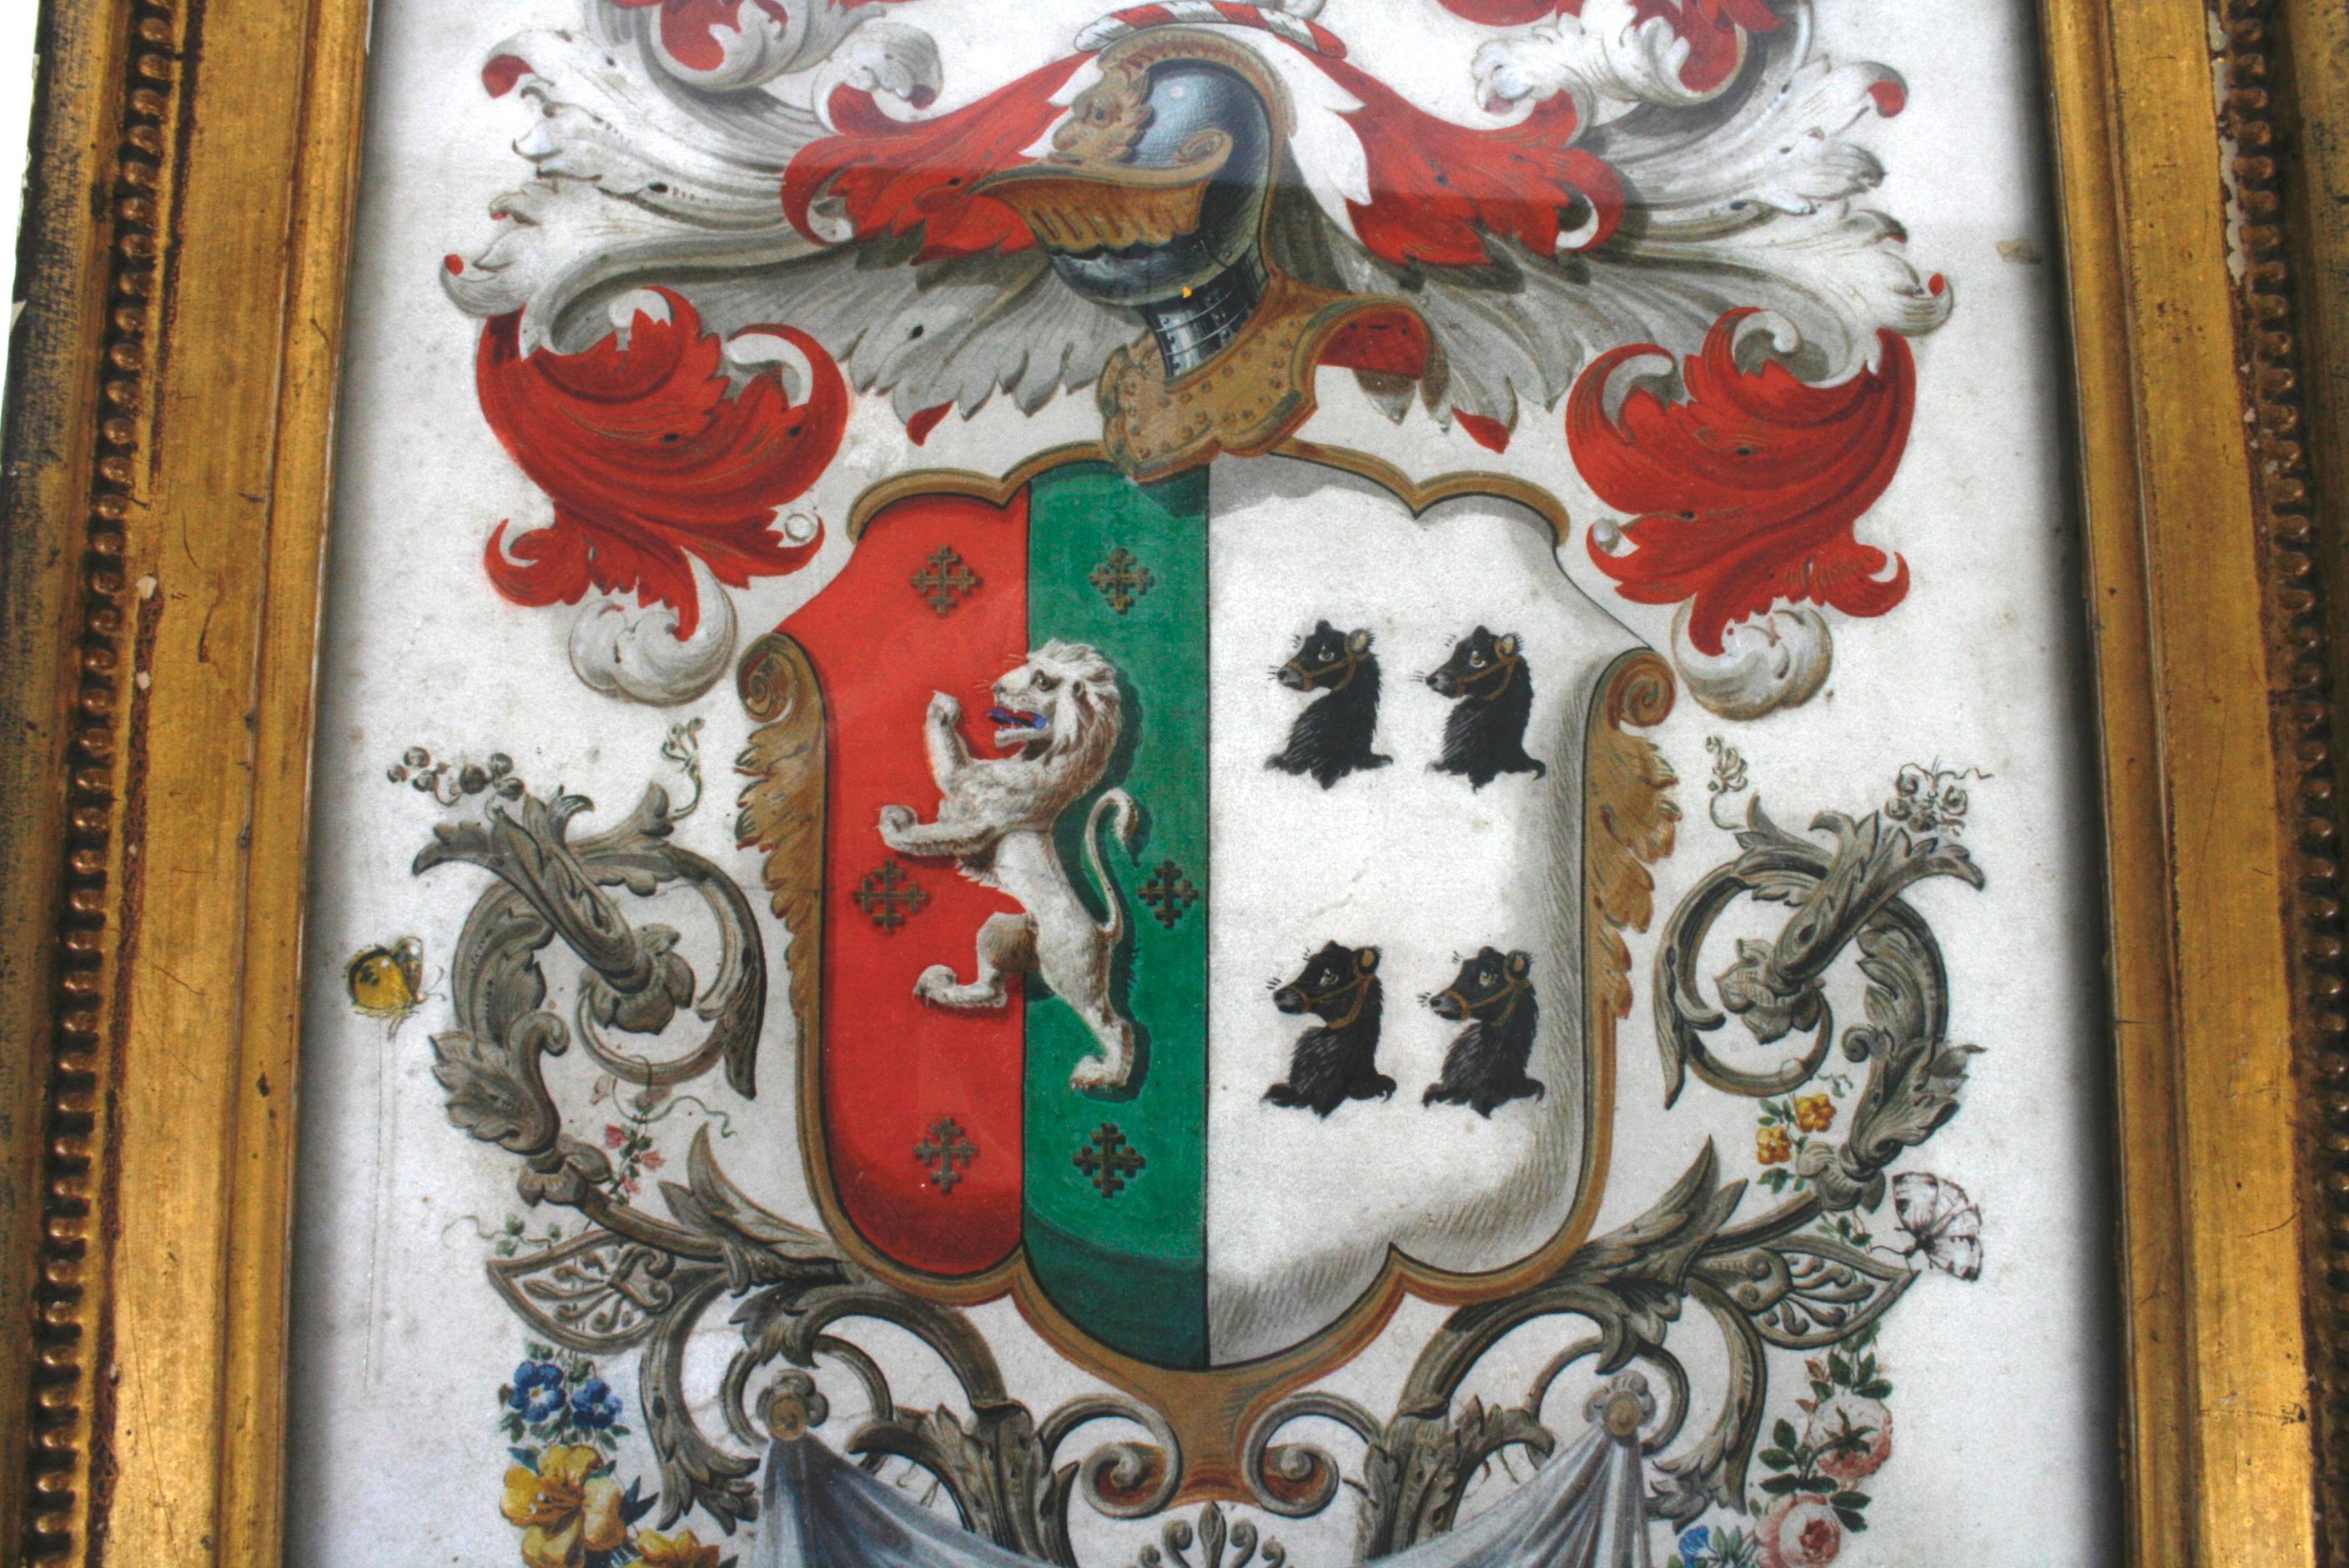 The Scottish coat of arms belonging to George Hutchinson reverse painted on glass. The painting is framed in an antique giltwood frame with a hand written note, in two hands, on the reverse protected by Lucite. The note includes 